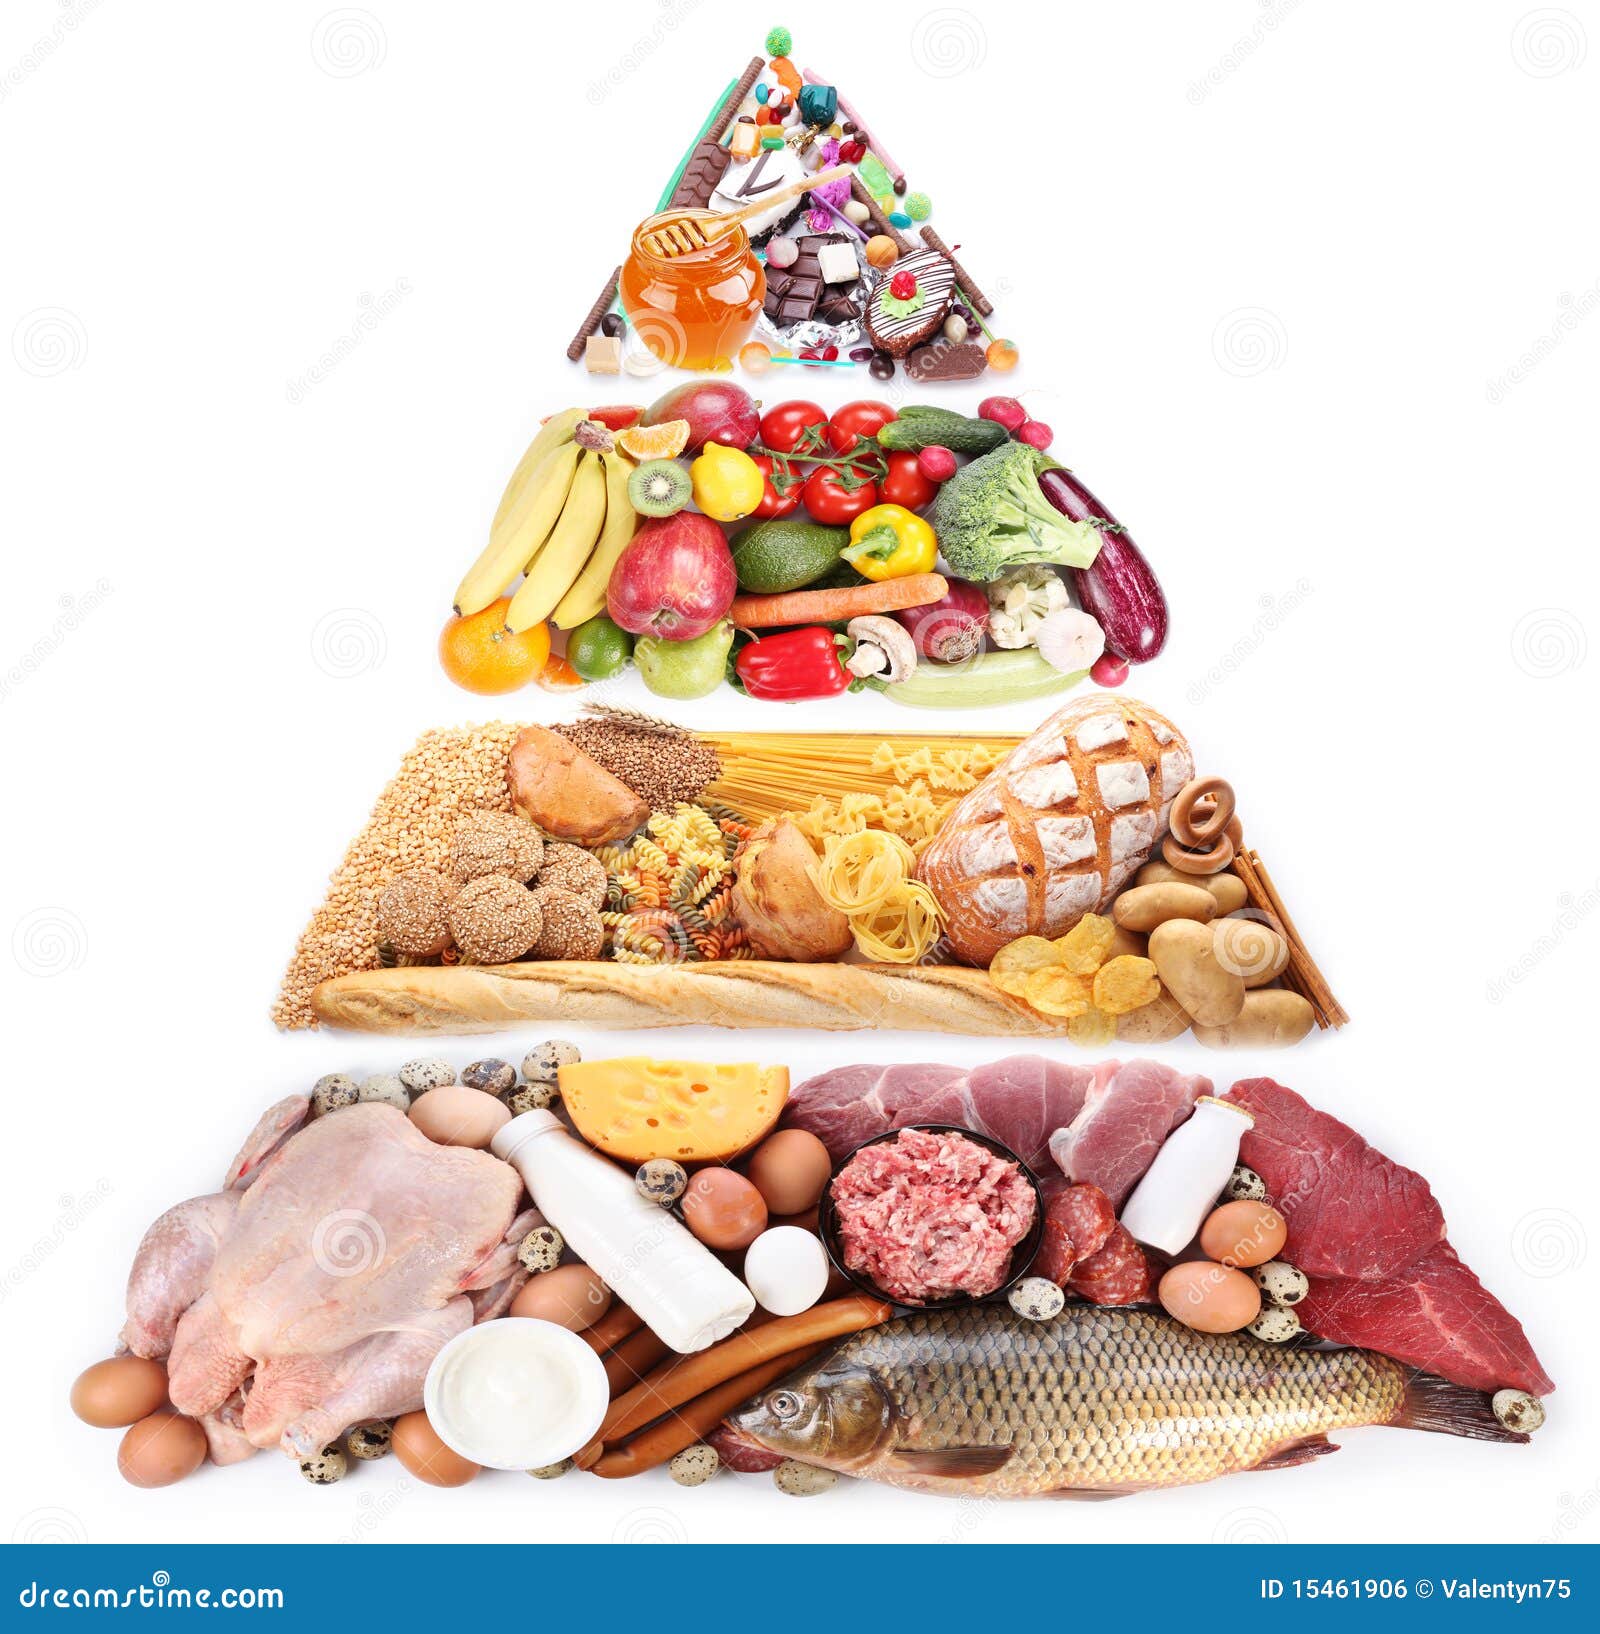 Food Pyramid For A Balanced Diet. Royalty Free Stock Image - Image ...